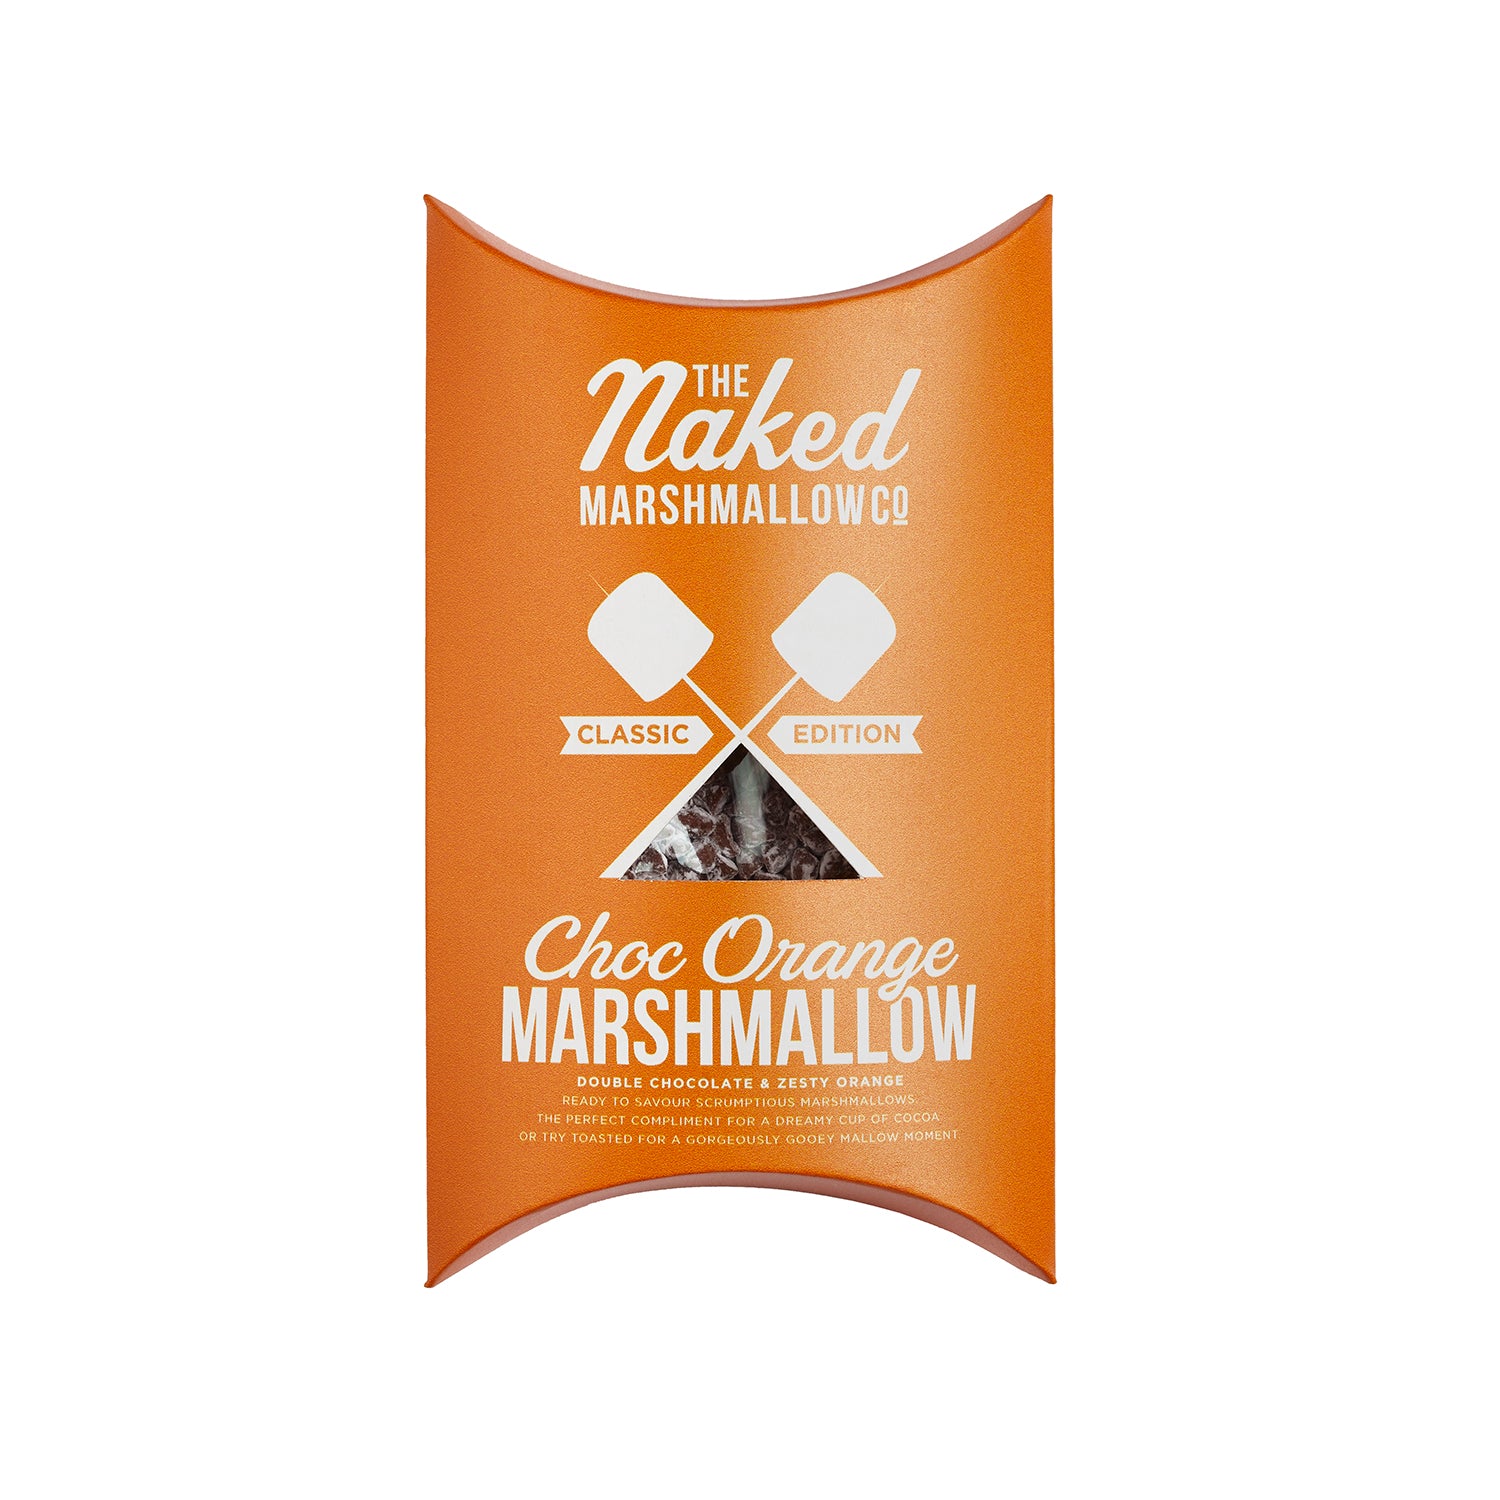 Classic Edition Gourmet Marshmallows (Case of 6)